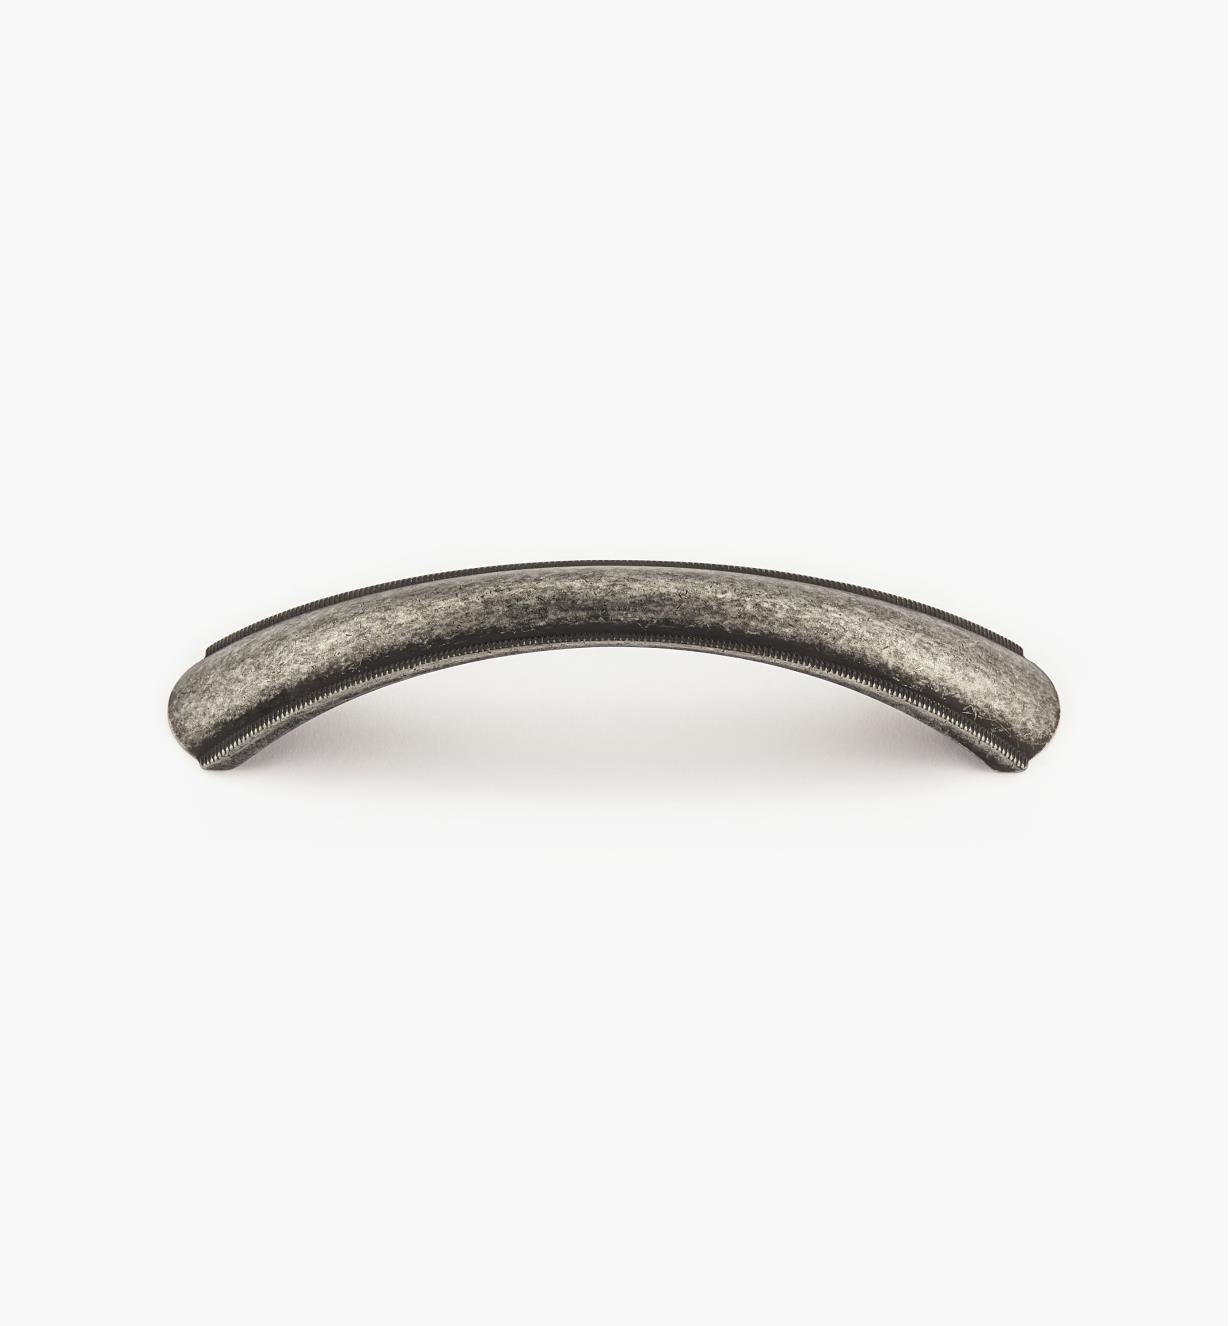 02W4058 - Old Silver Handle